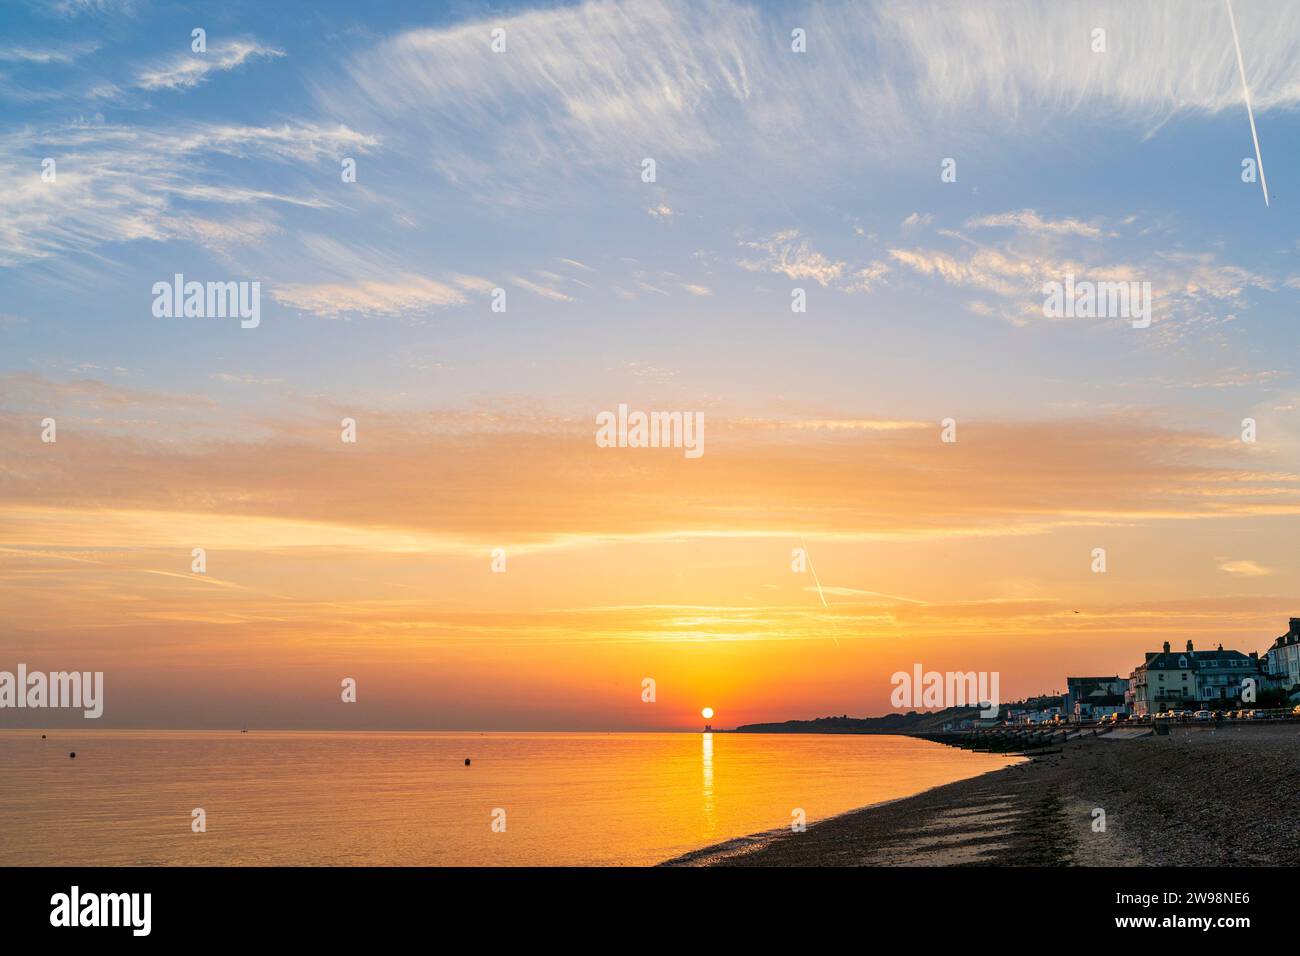 Wide angle shot, sunrise over the beach at Herne Bay with the sun directly over the distant ruins of the 12th century Anglo-Saxon church at Reculver. Stock Photo